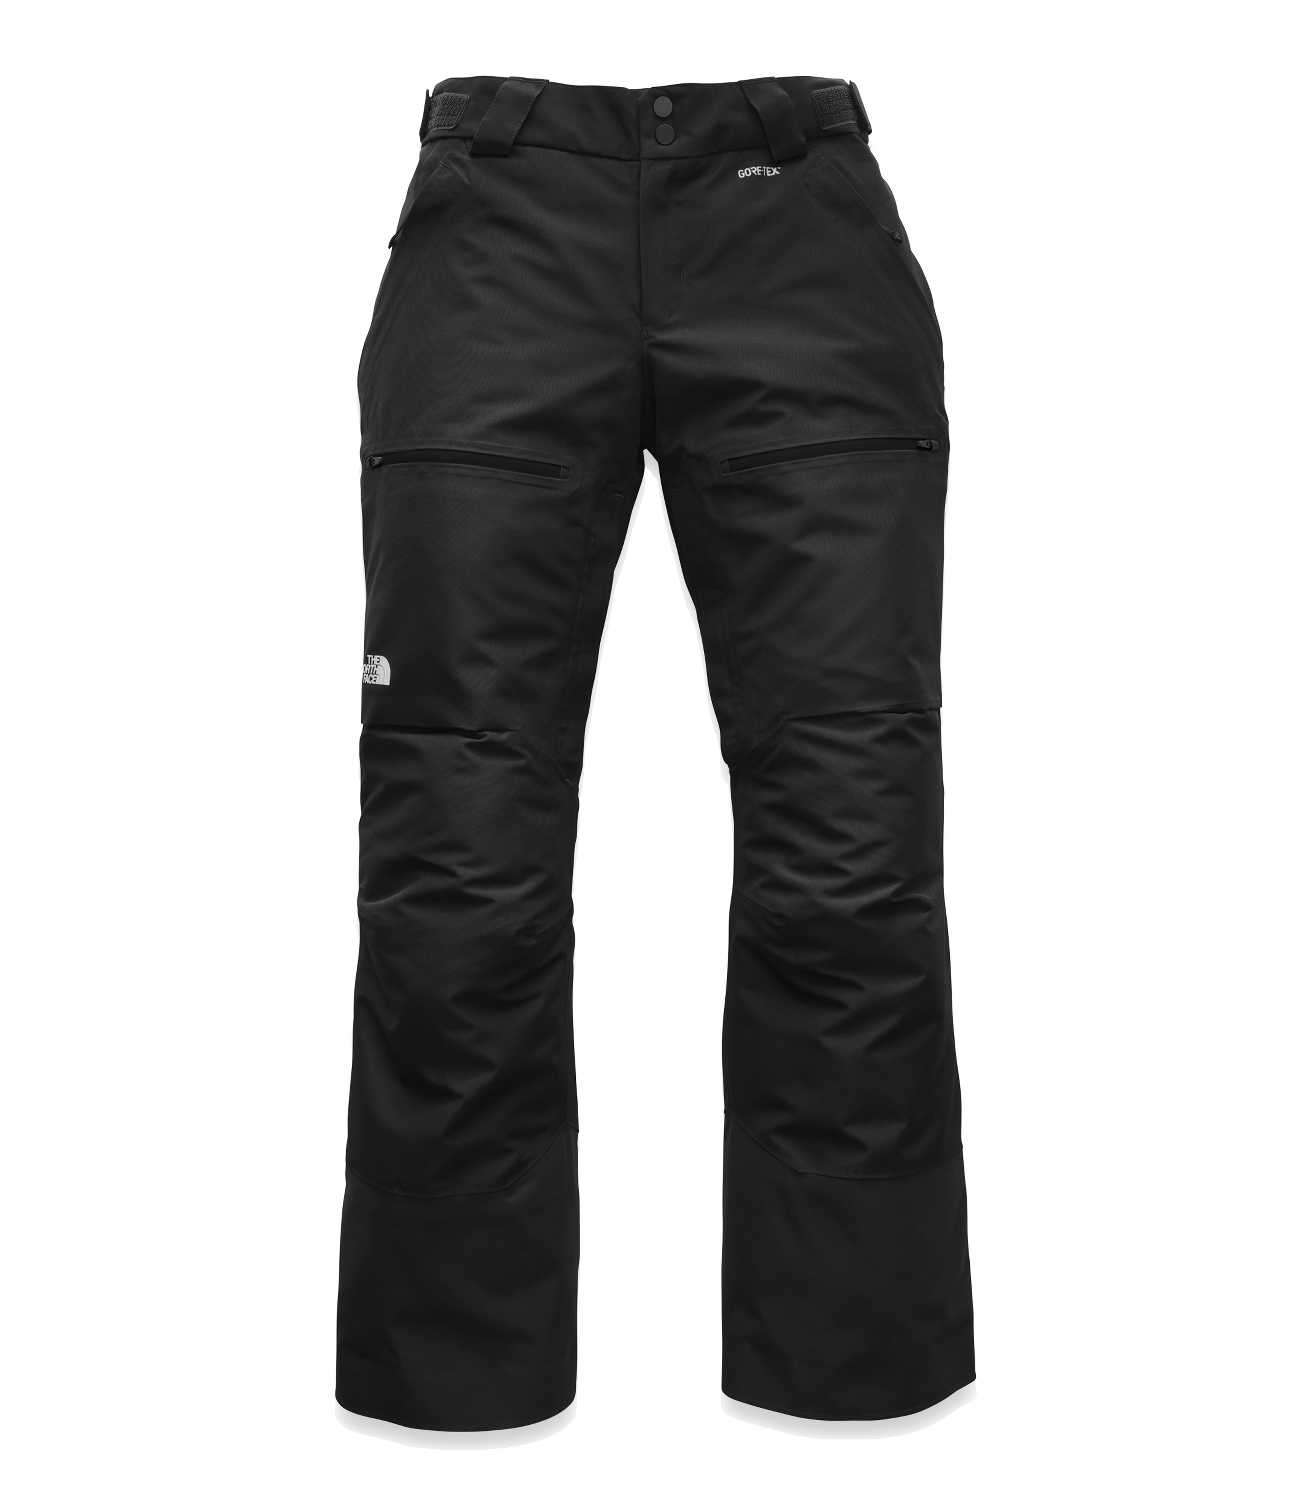 The North Face HyVent Pants Waterproof Ski Snowboard Snow 